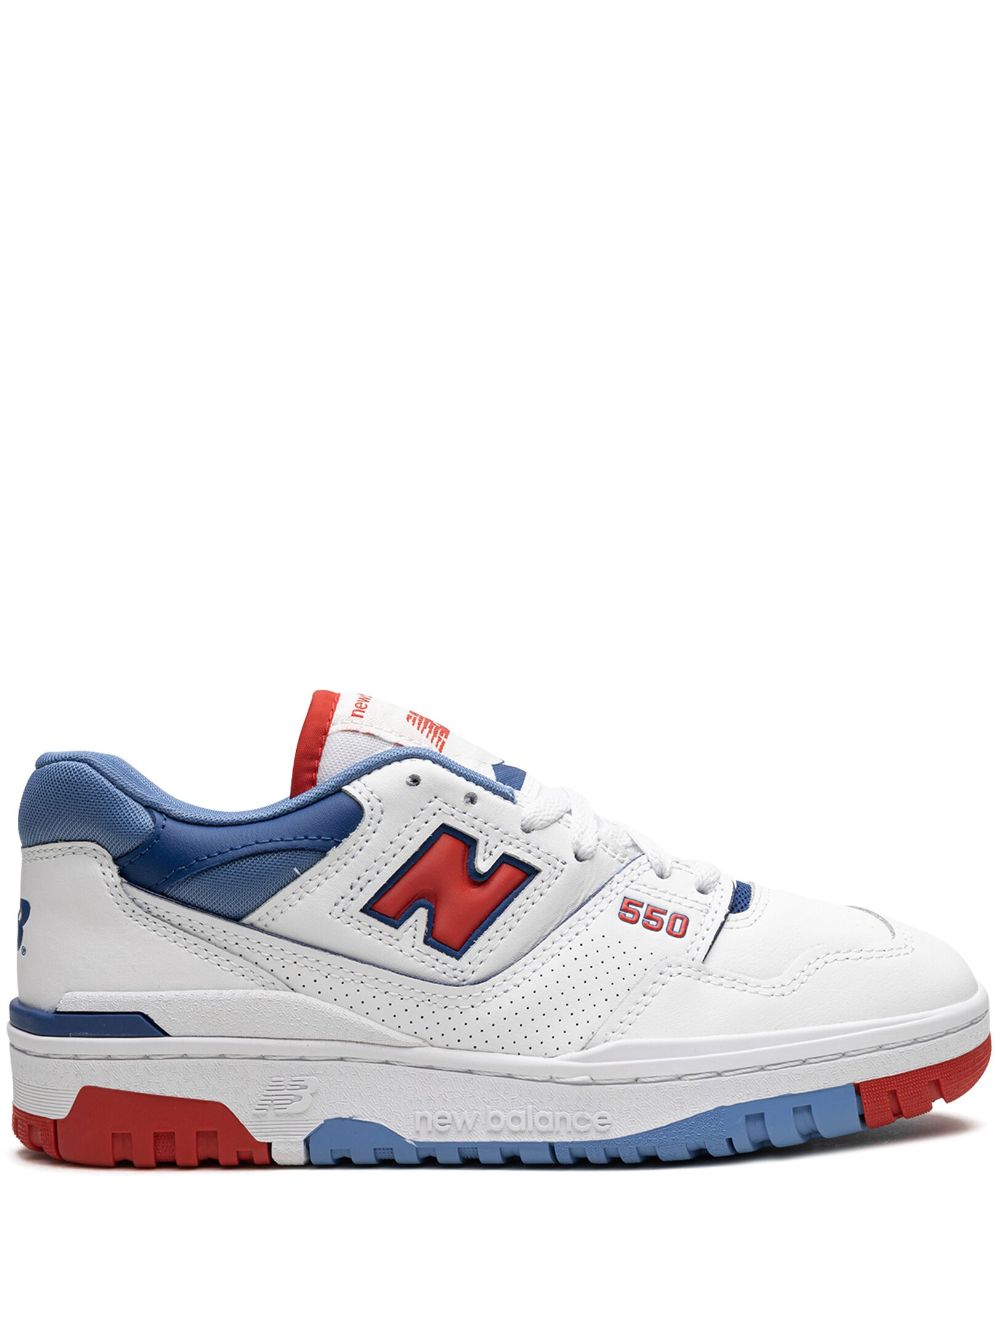 New Balance 550 "White/Red/Blue" sneakers